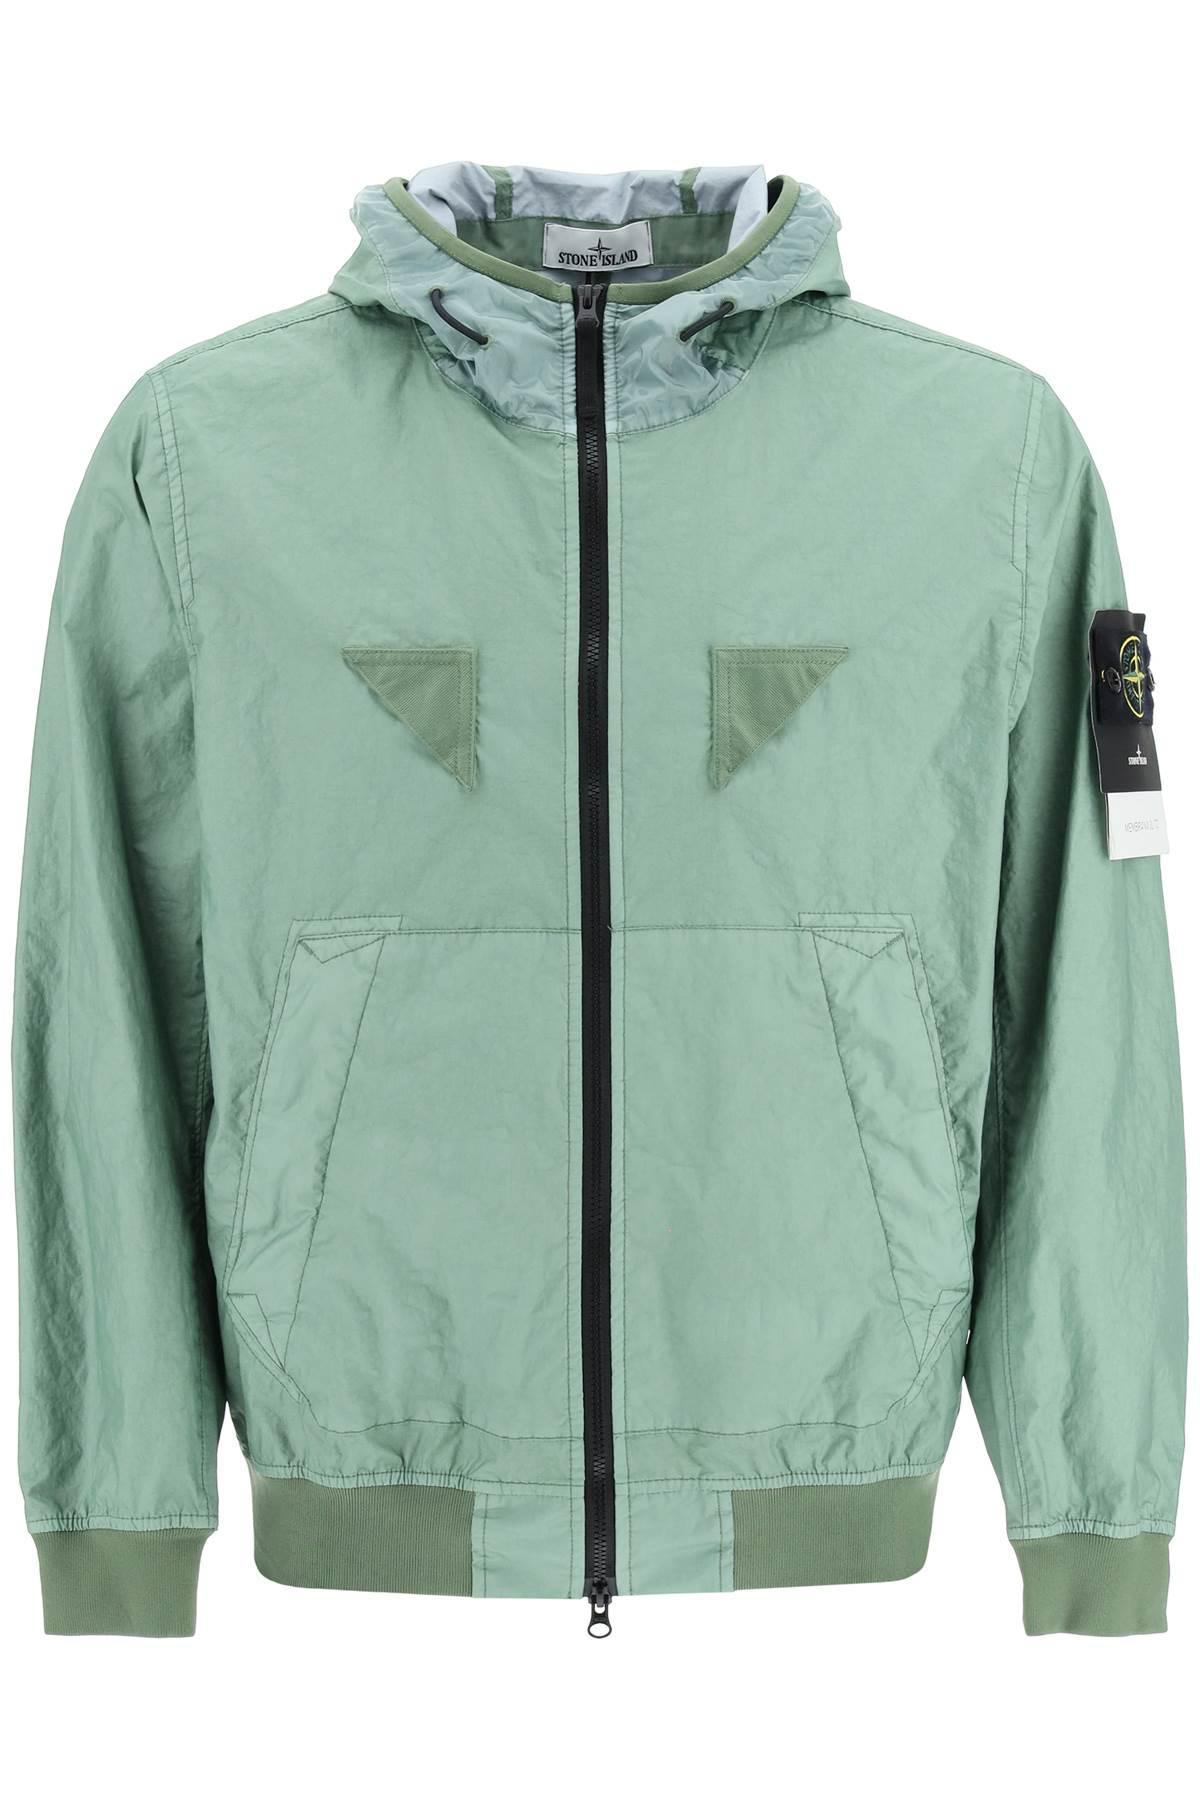 Stone Island Membrana 3l Tc Hooded Jacket in Green for Men | Lyst